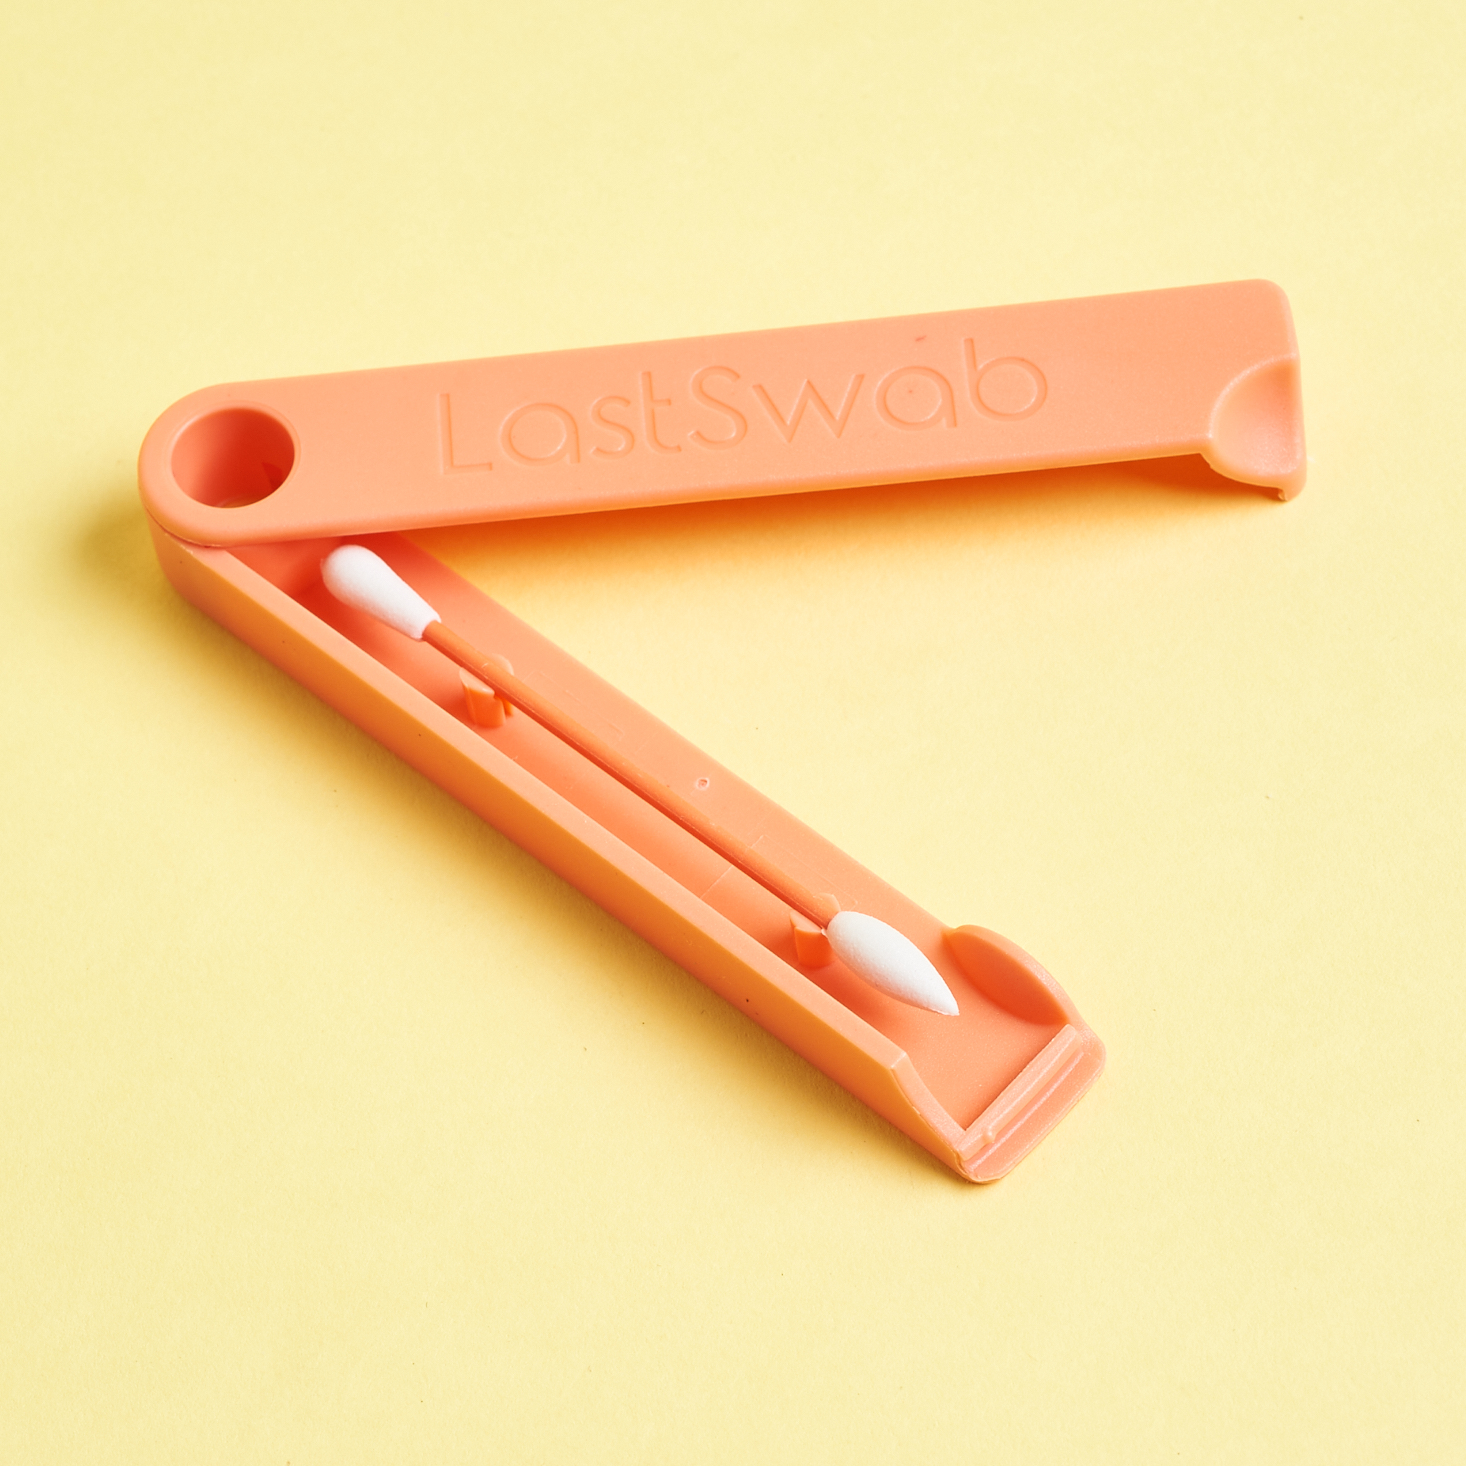 LastObject LastSwab review - A reusable alternative to the Q-tip - The  Gadgeteer